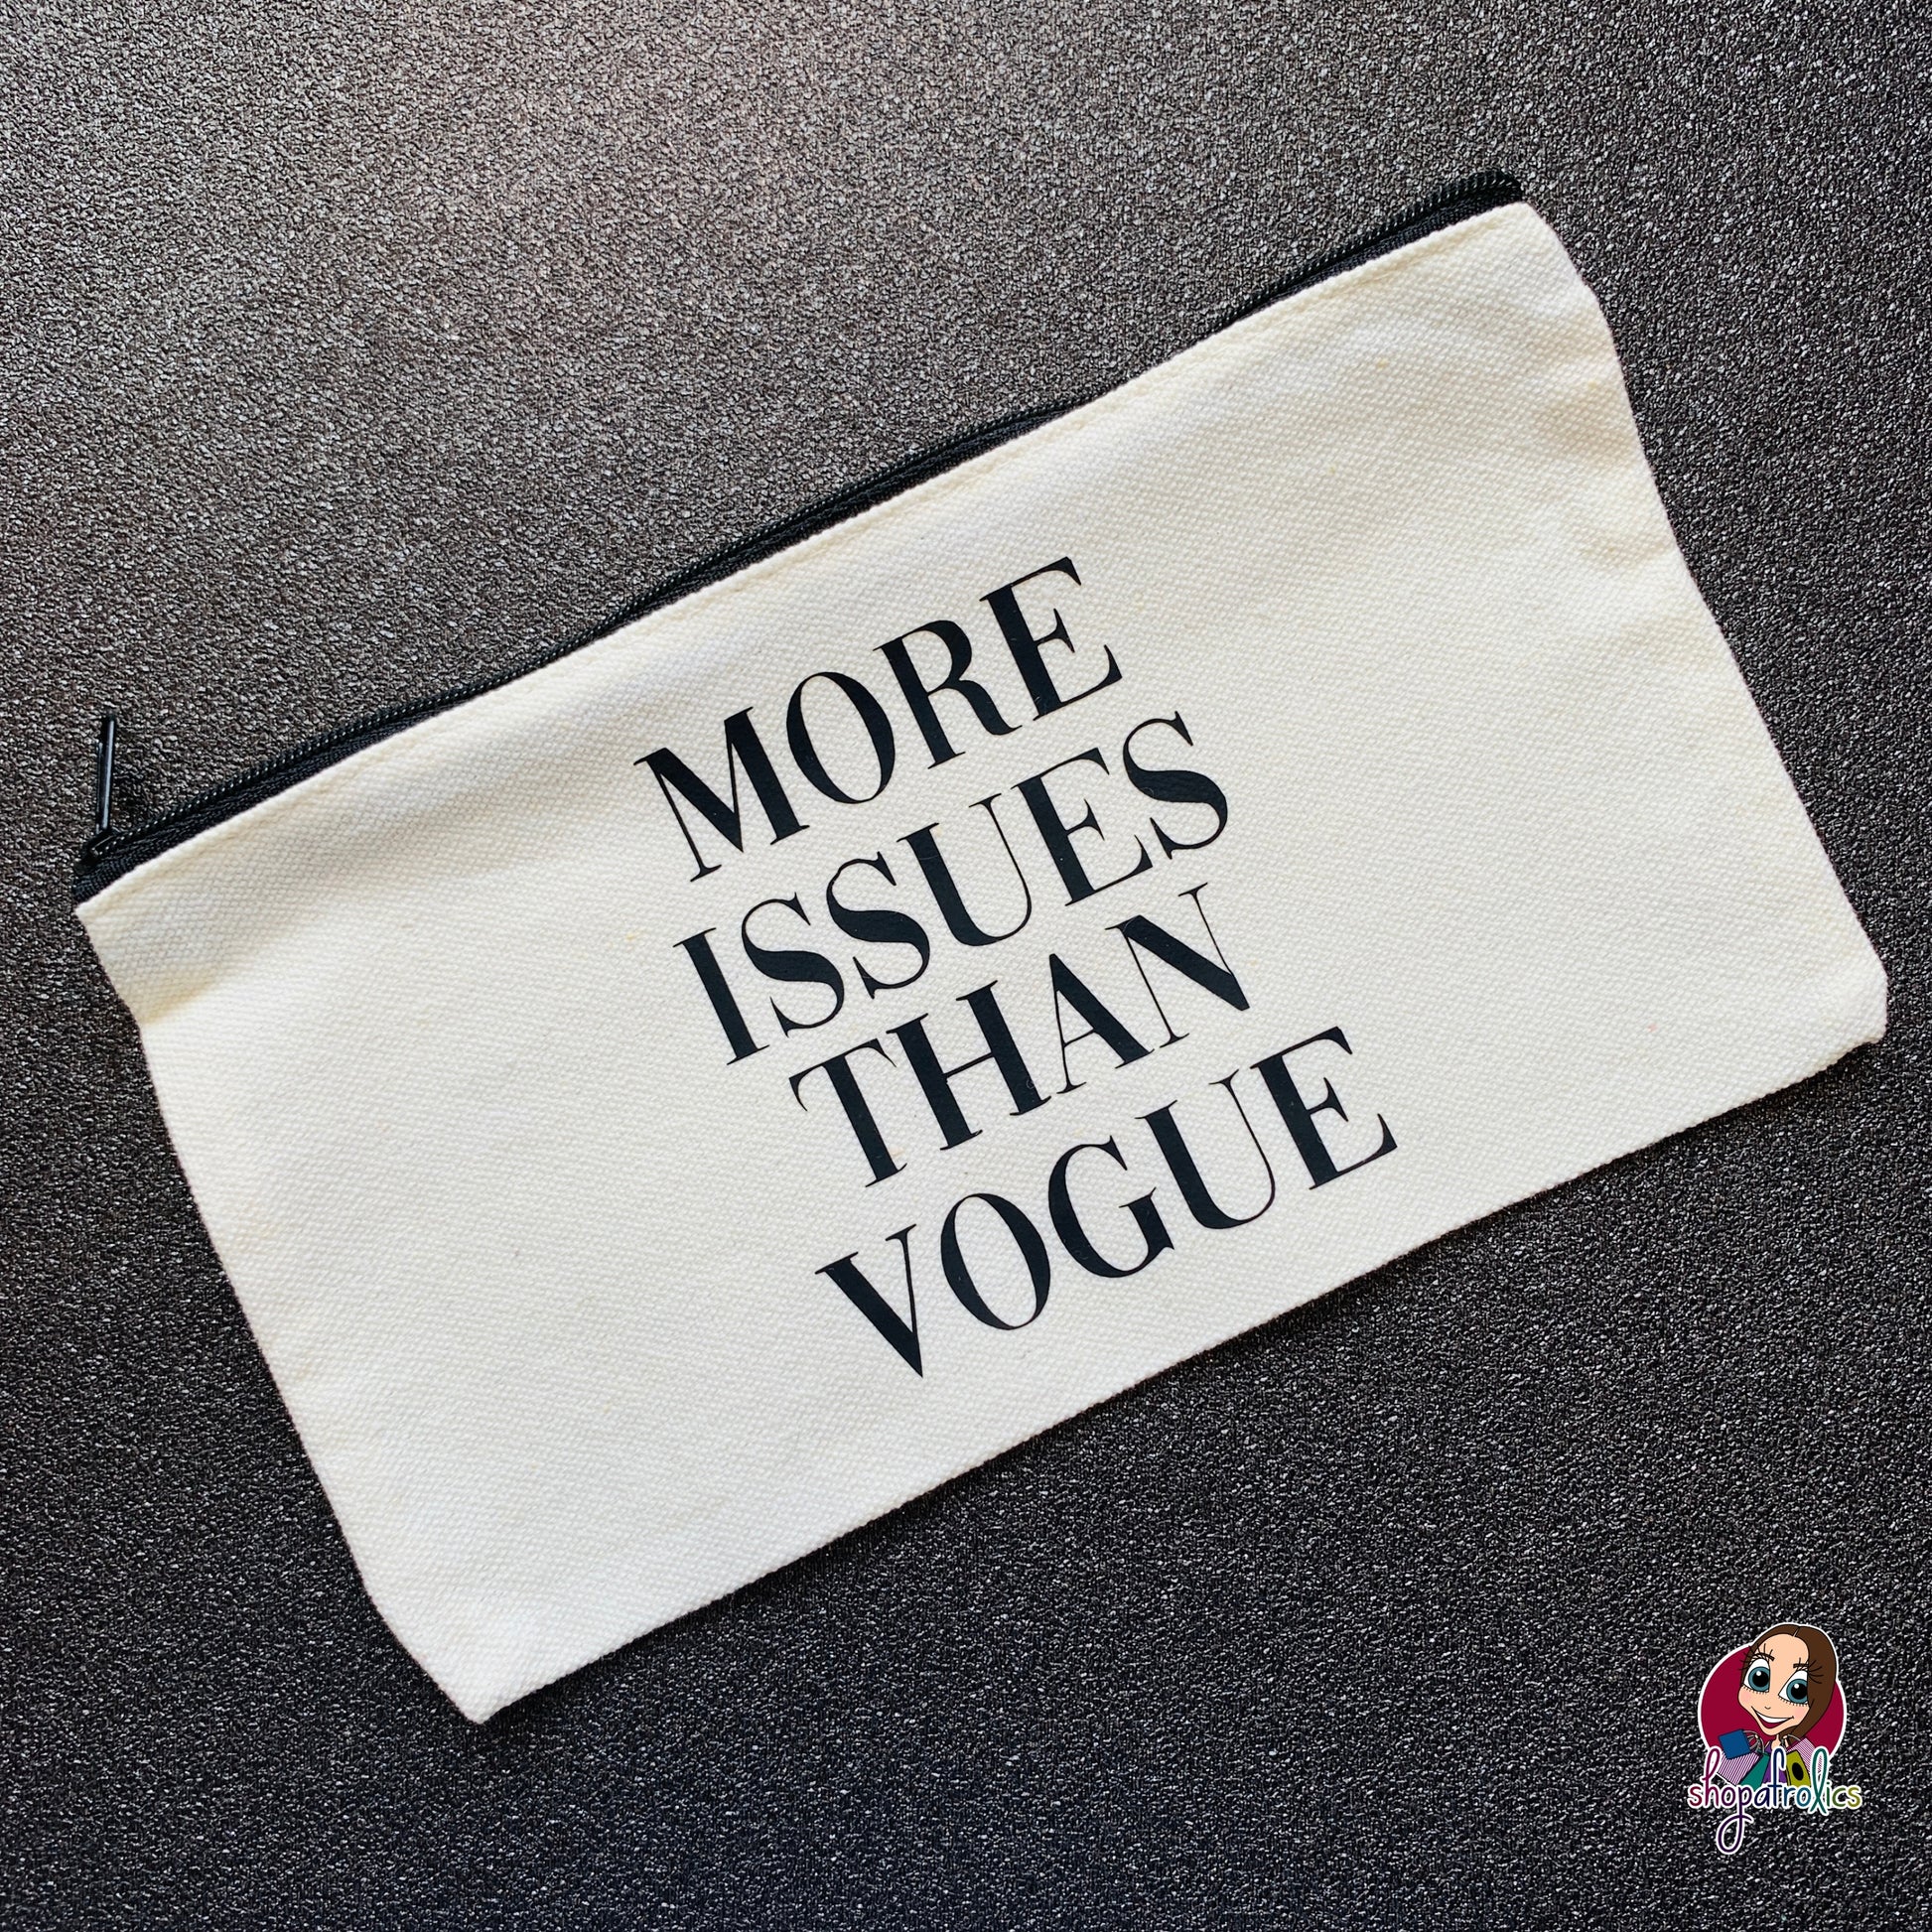 More Issues Than Vogue Cosmetic Bag